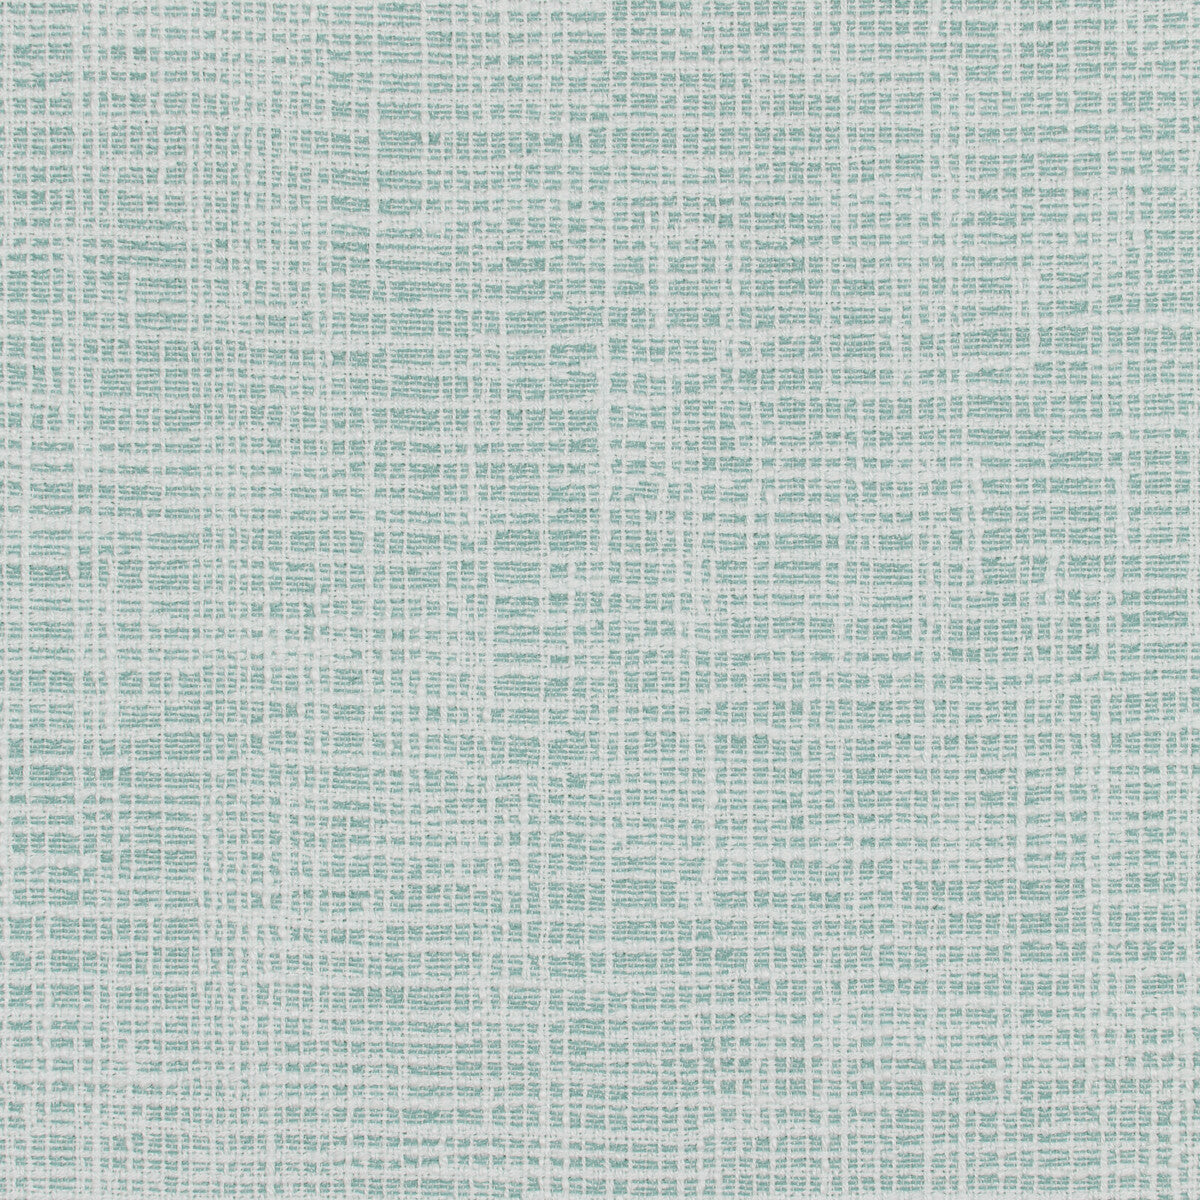 Kravet Design fabric in 36083-13 color - pattern 36083.13.0 - by Kravet Design in the Inside Out Performance Fabrics collection